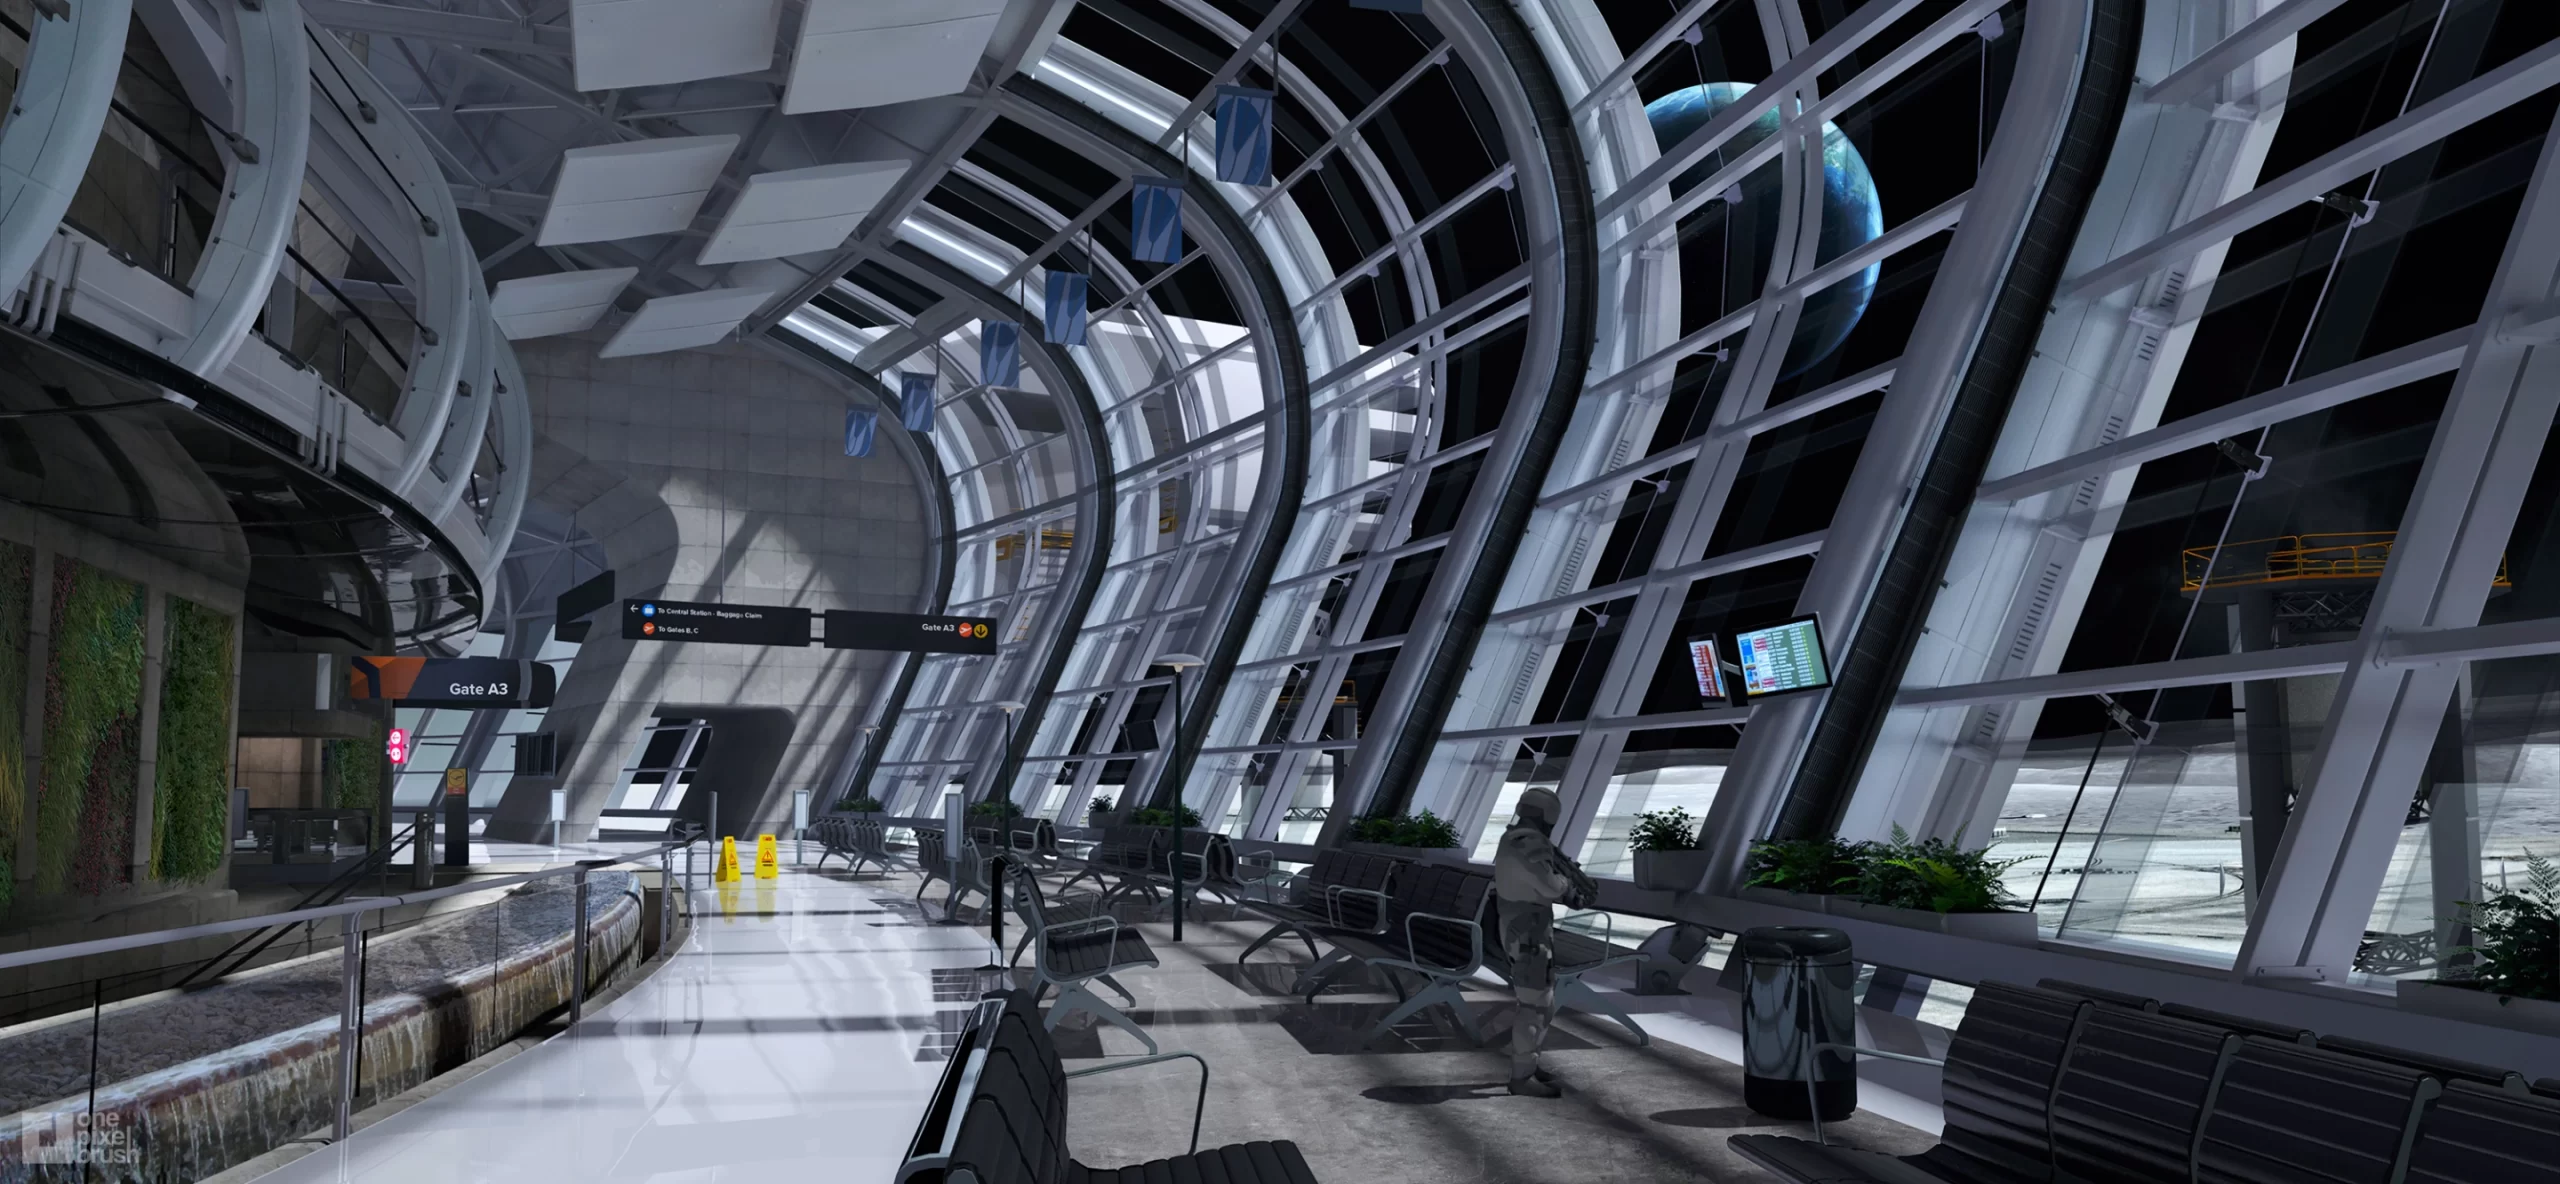 call-of-duty-infinite-warfare-video-game-concept-art-space-station-interior-2880x1332